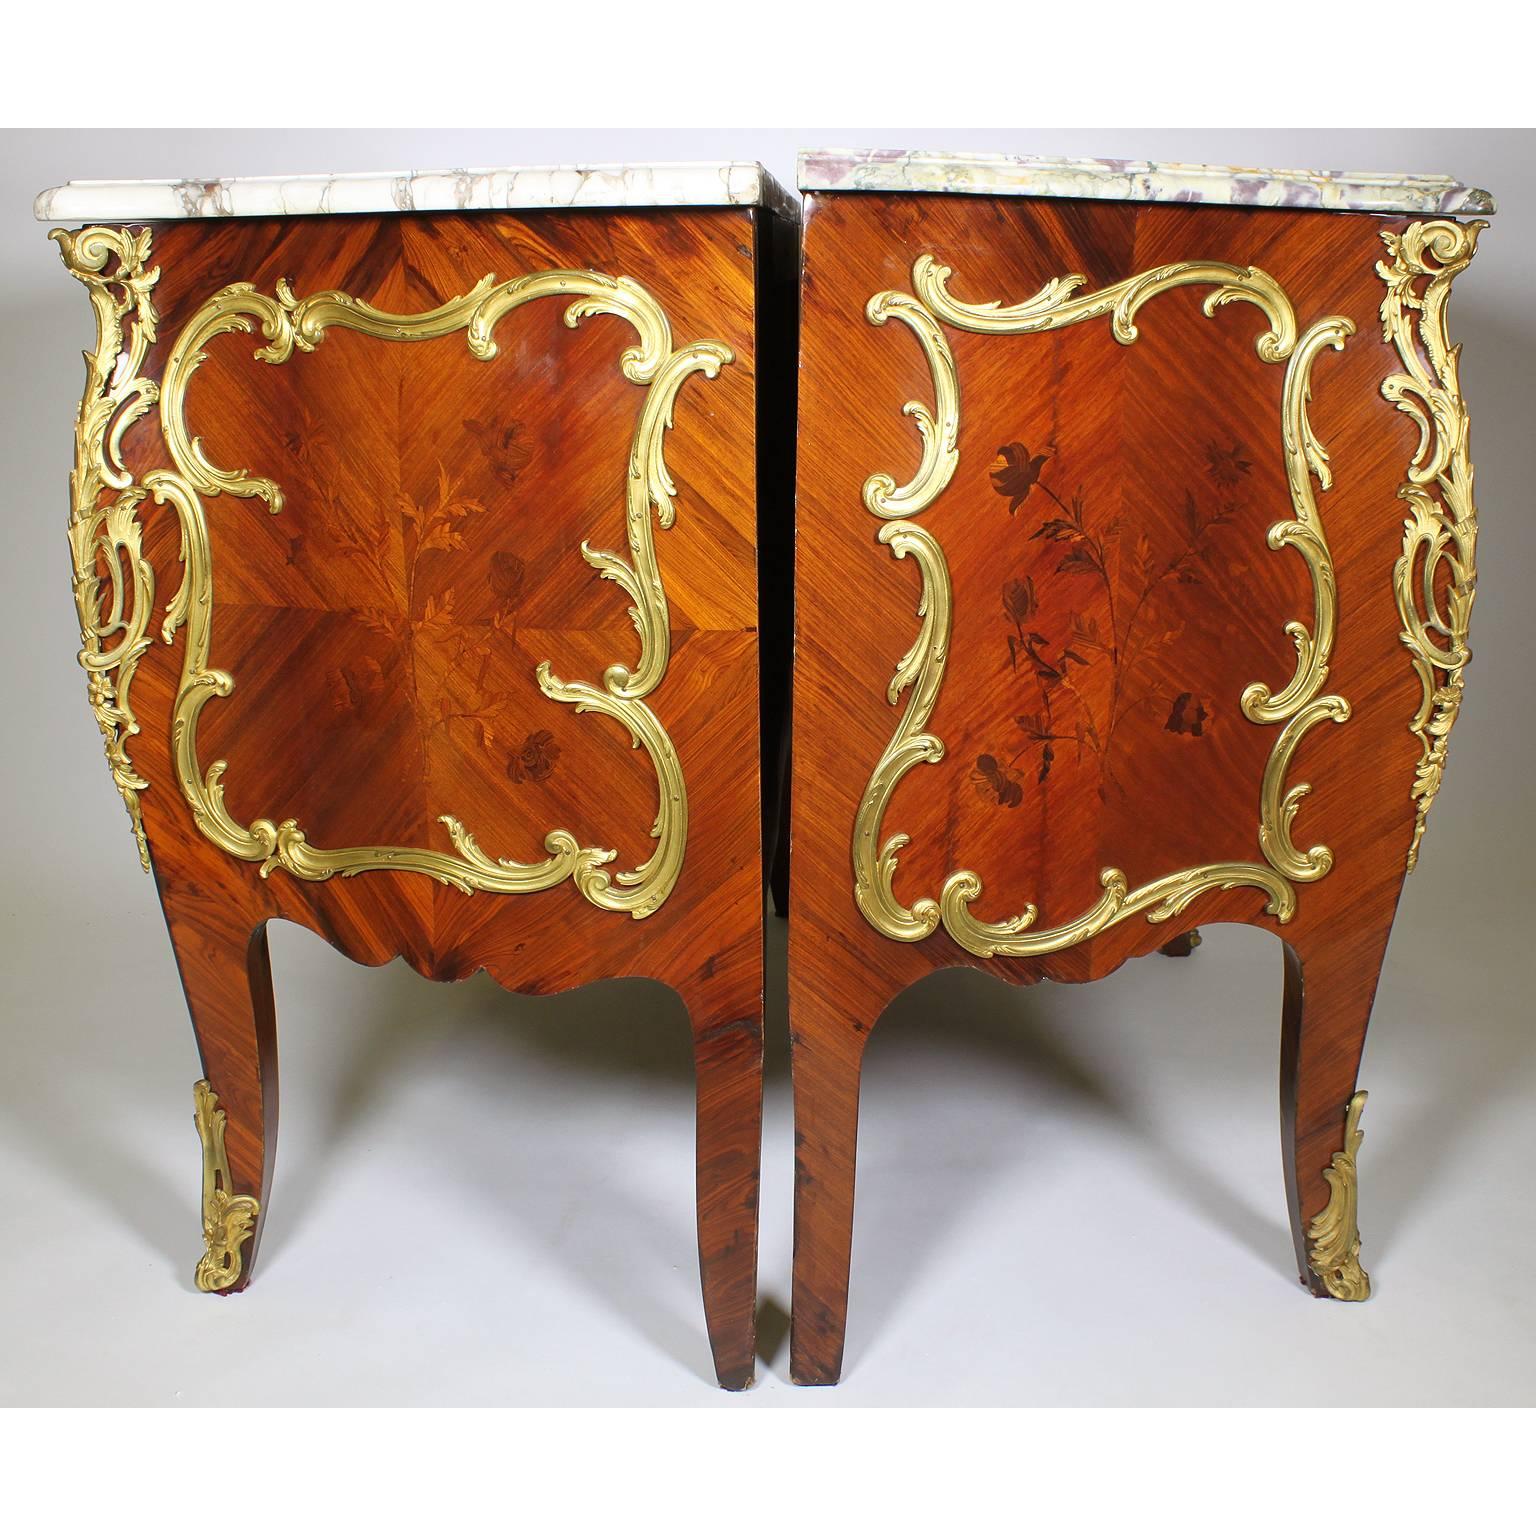 Semi-Pair of French 19th Century Louis XV Style Marquetry & Gilt-Bronze Commodes 5